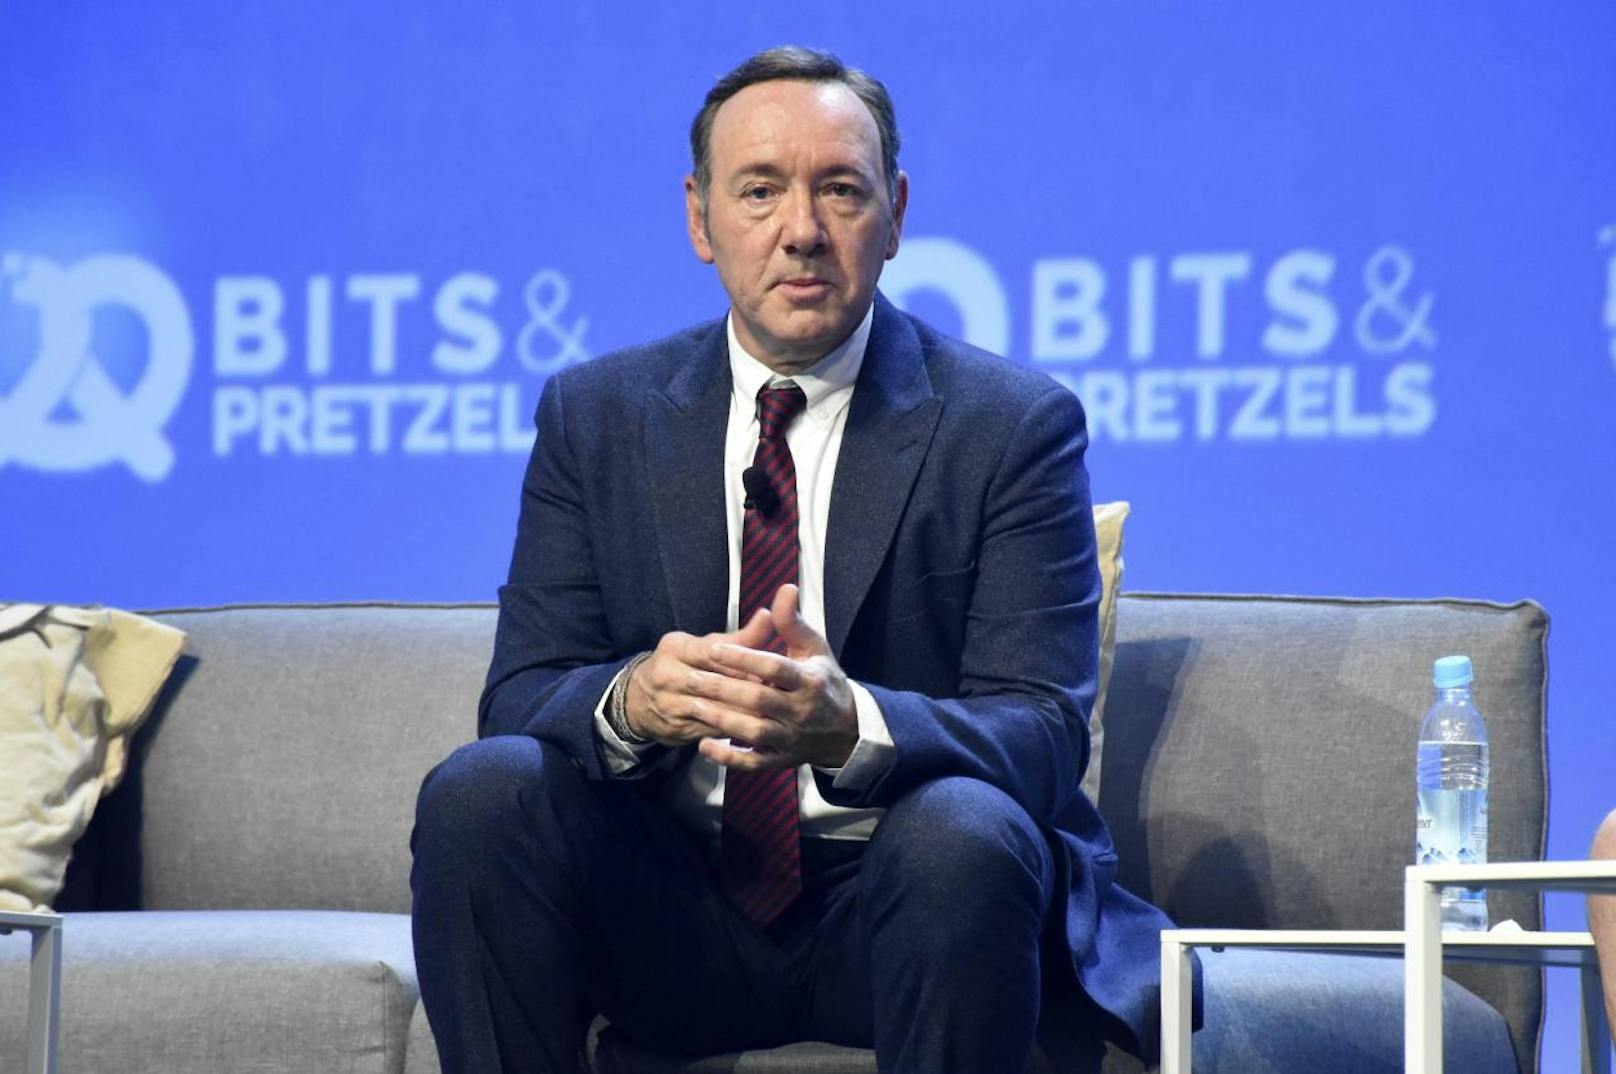 Kevin Spacey beim Founders Festival 2016 in München